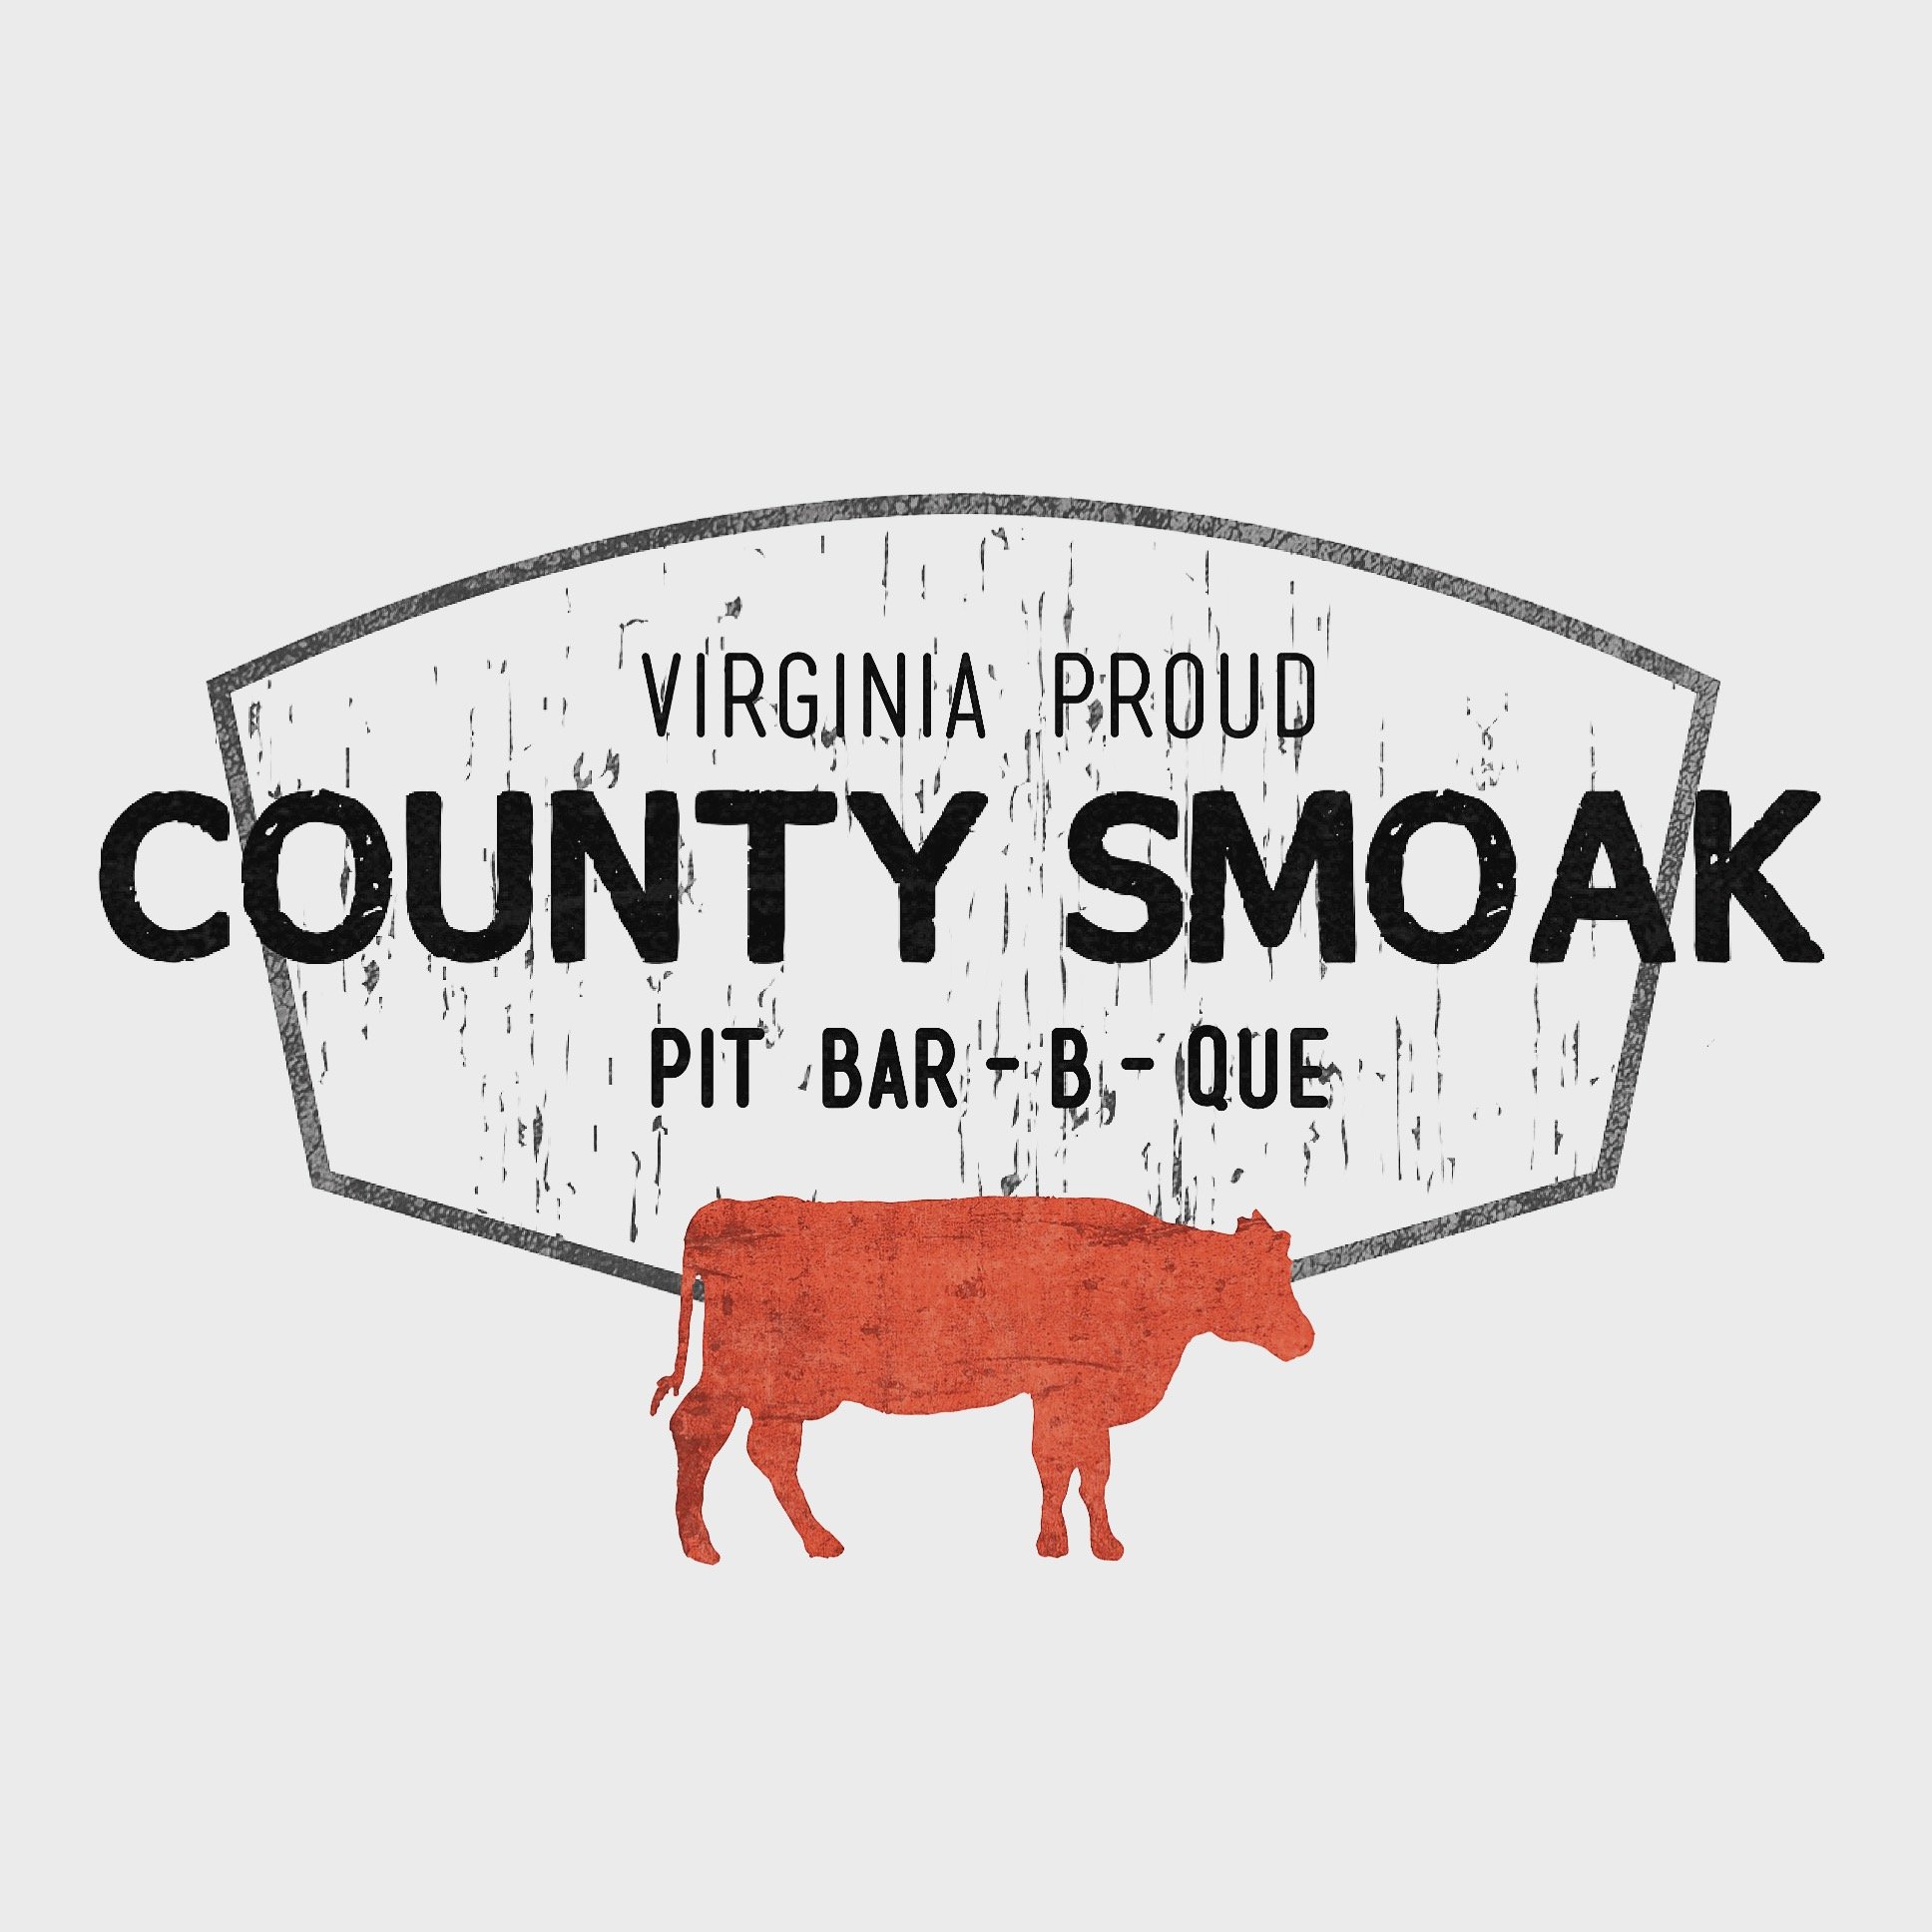 County Smoak is an all wood and charcoal fired Chef driven BBQ restaurant. We are owned and operated by Jess and Ken Hess. located at 7423 Timberlake Road.